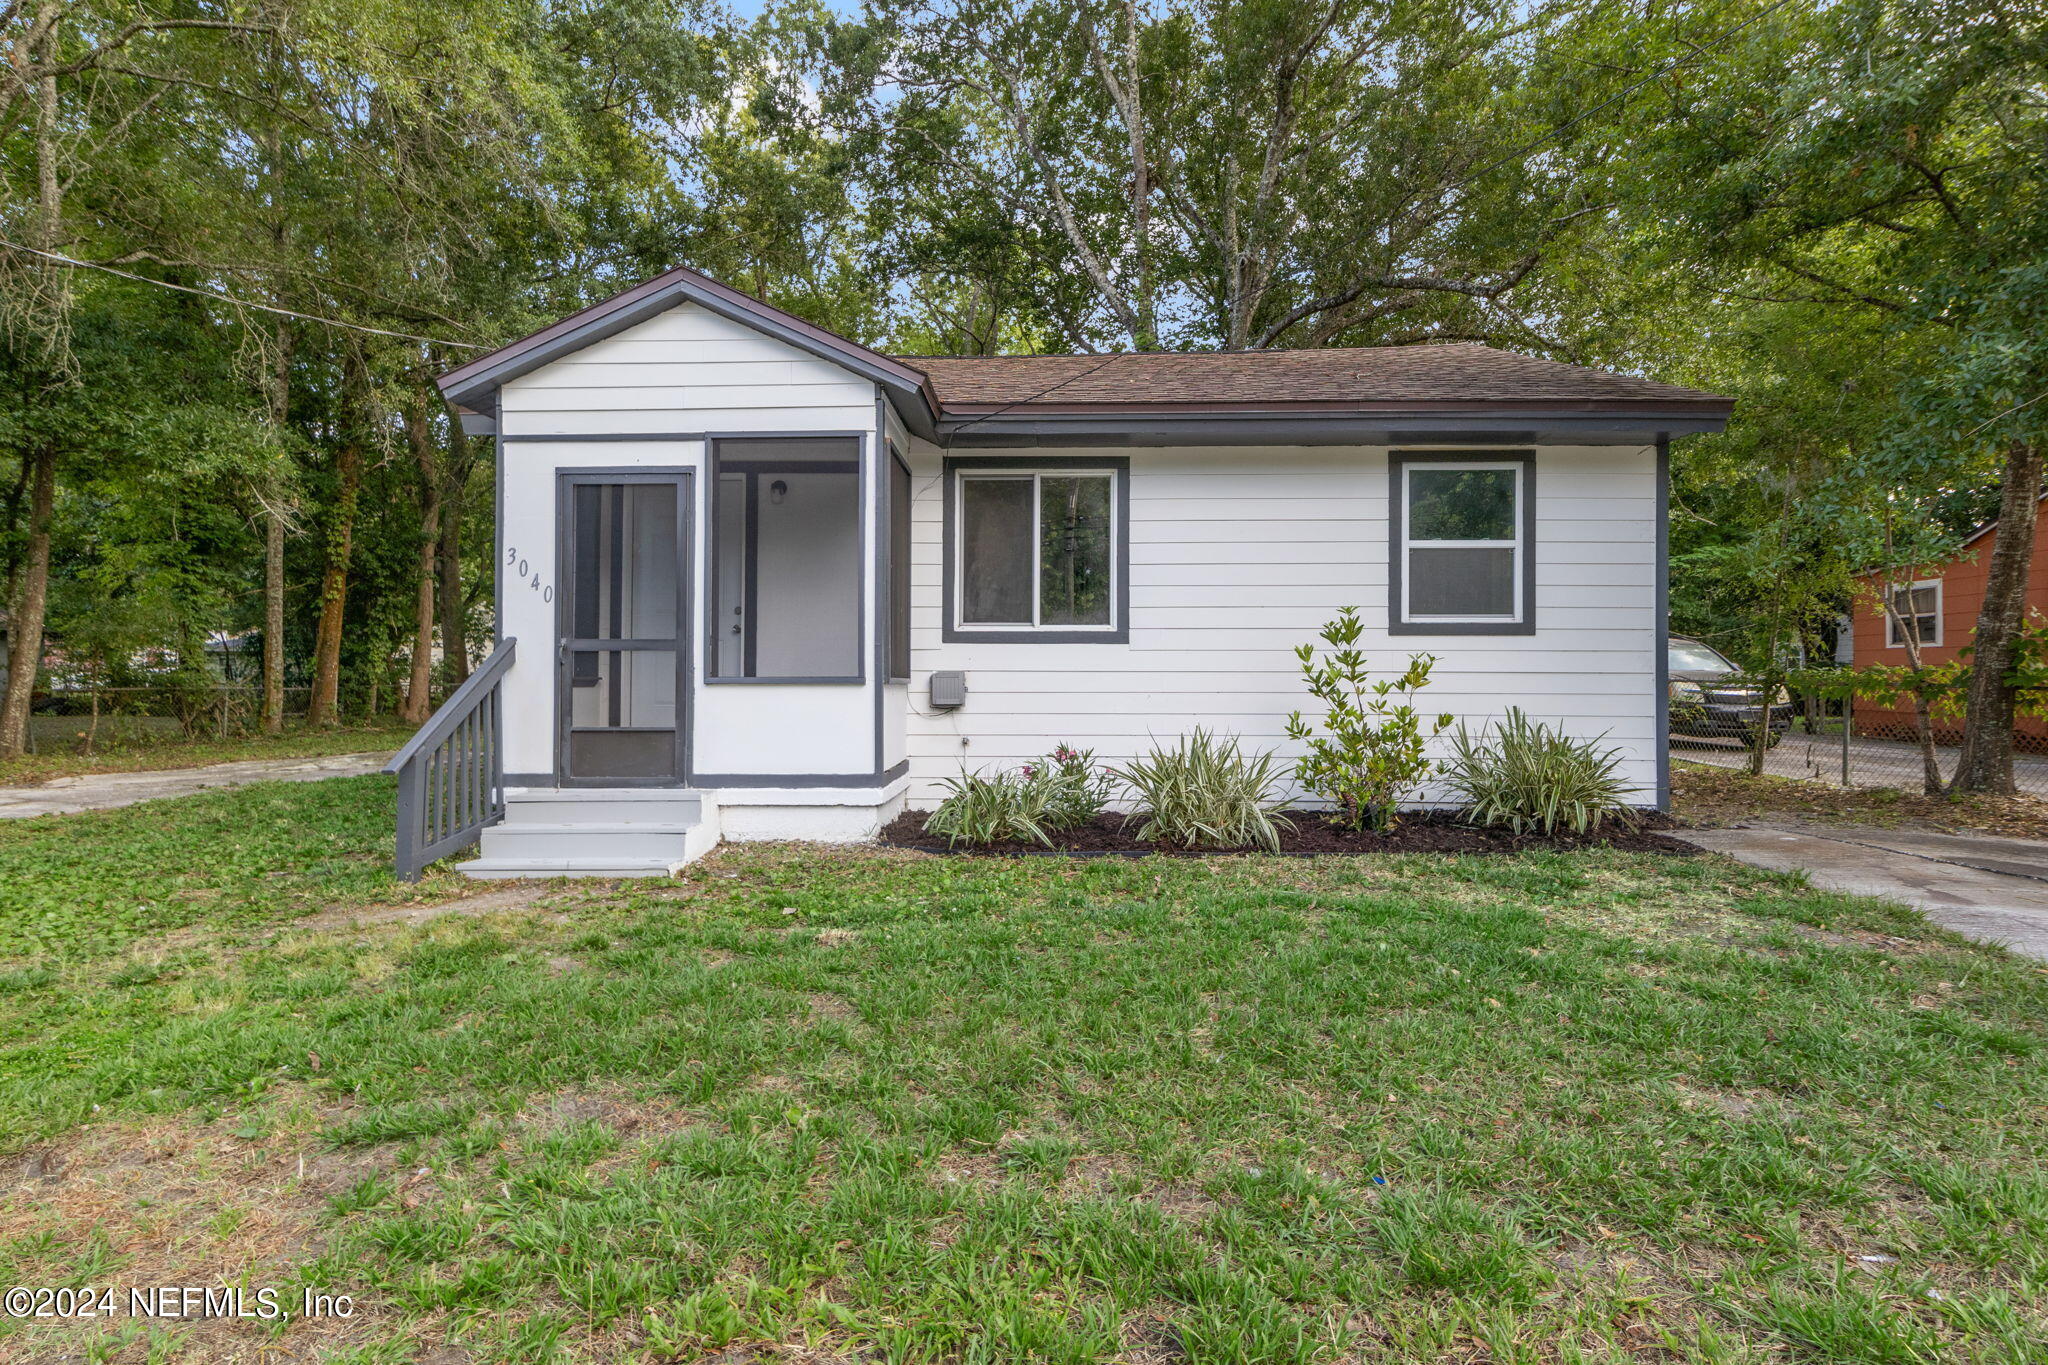 Jacksonville, FL home for sale located at 3040 W 5th Street, Jacksonville, FL 32254